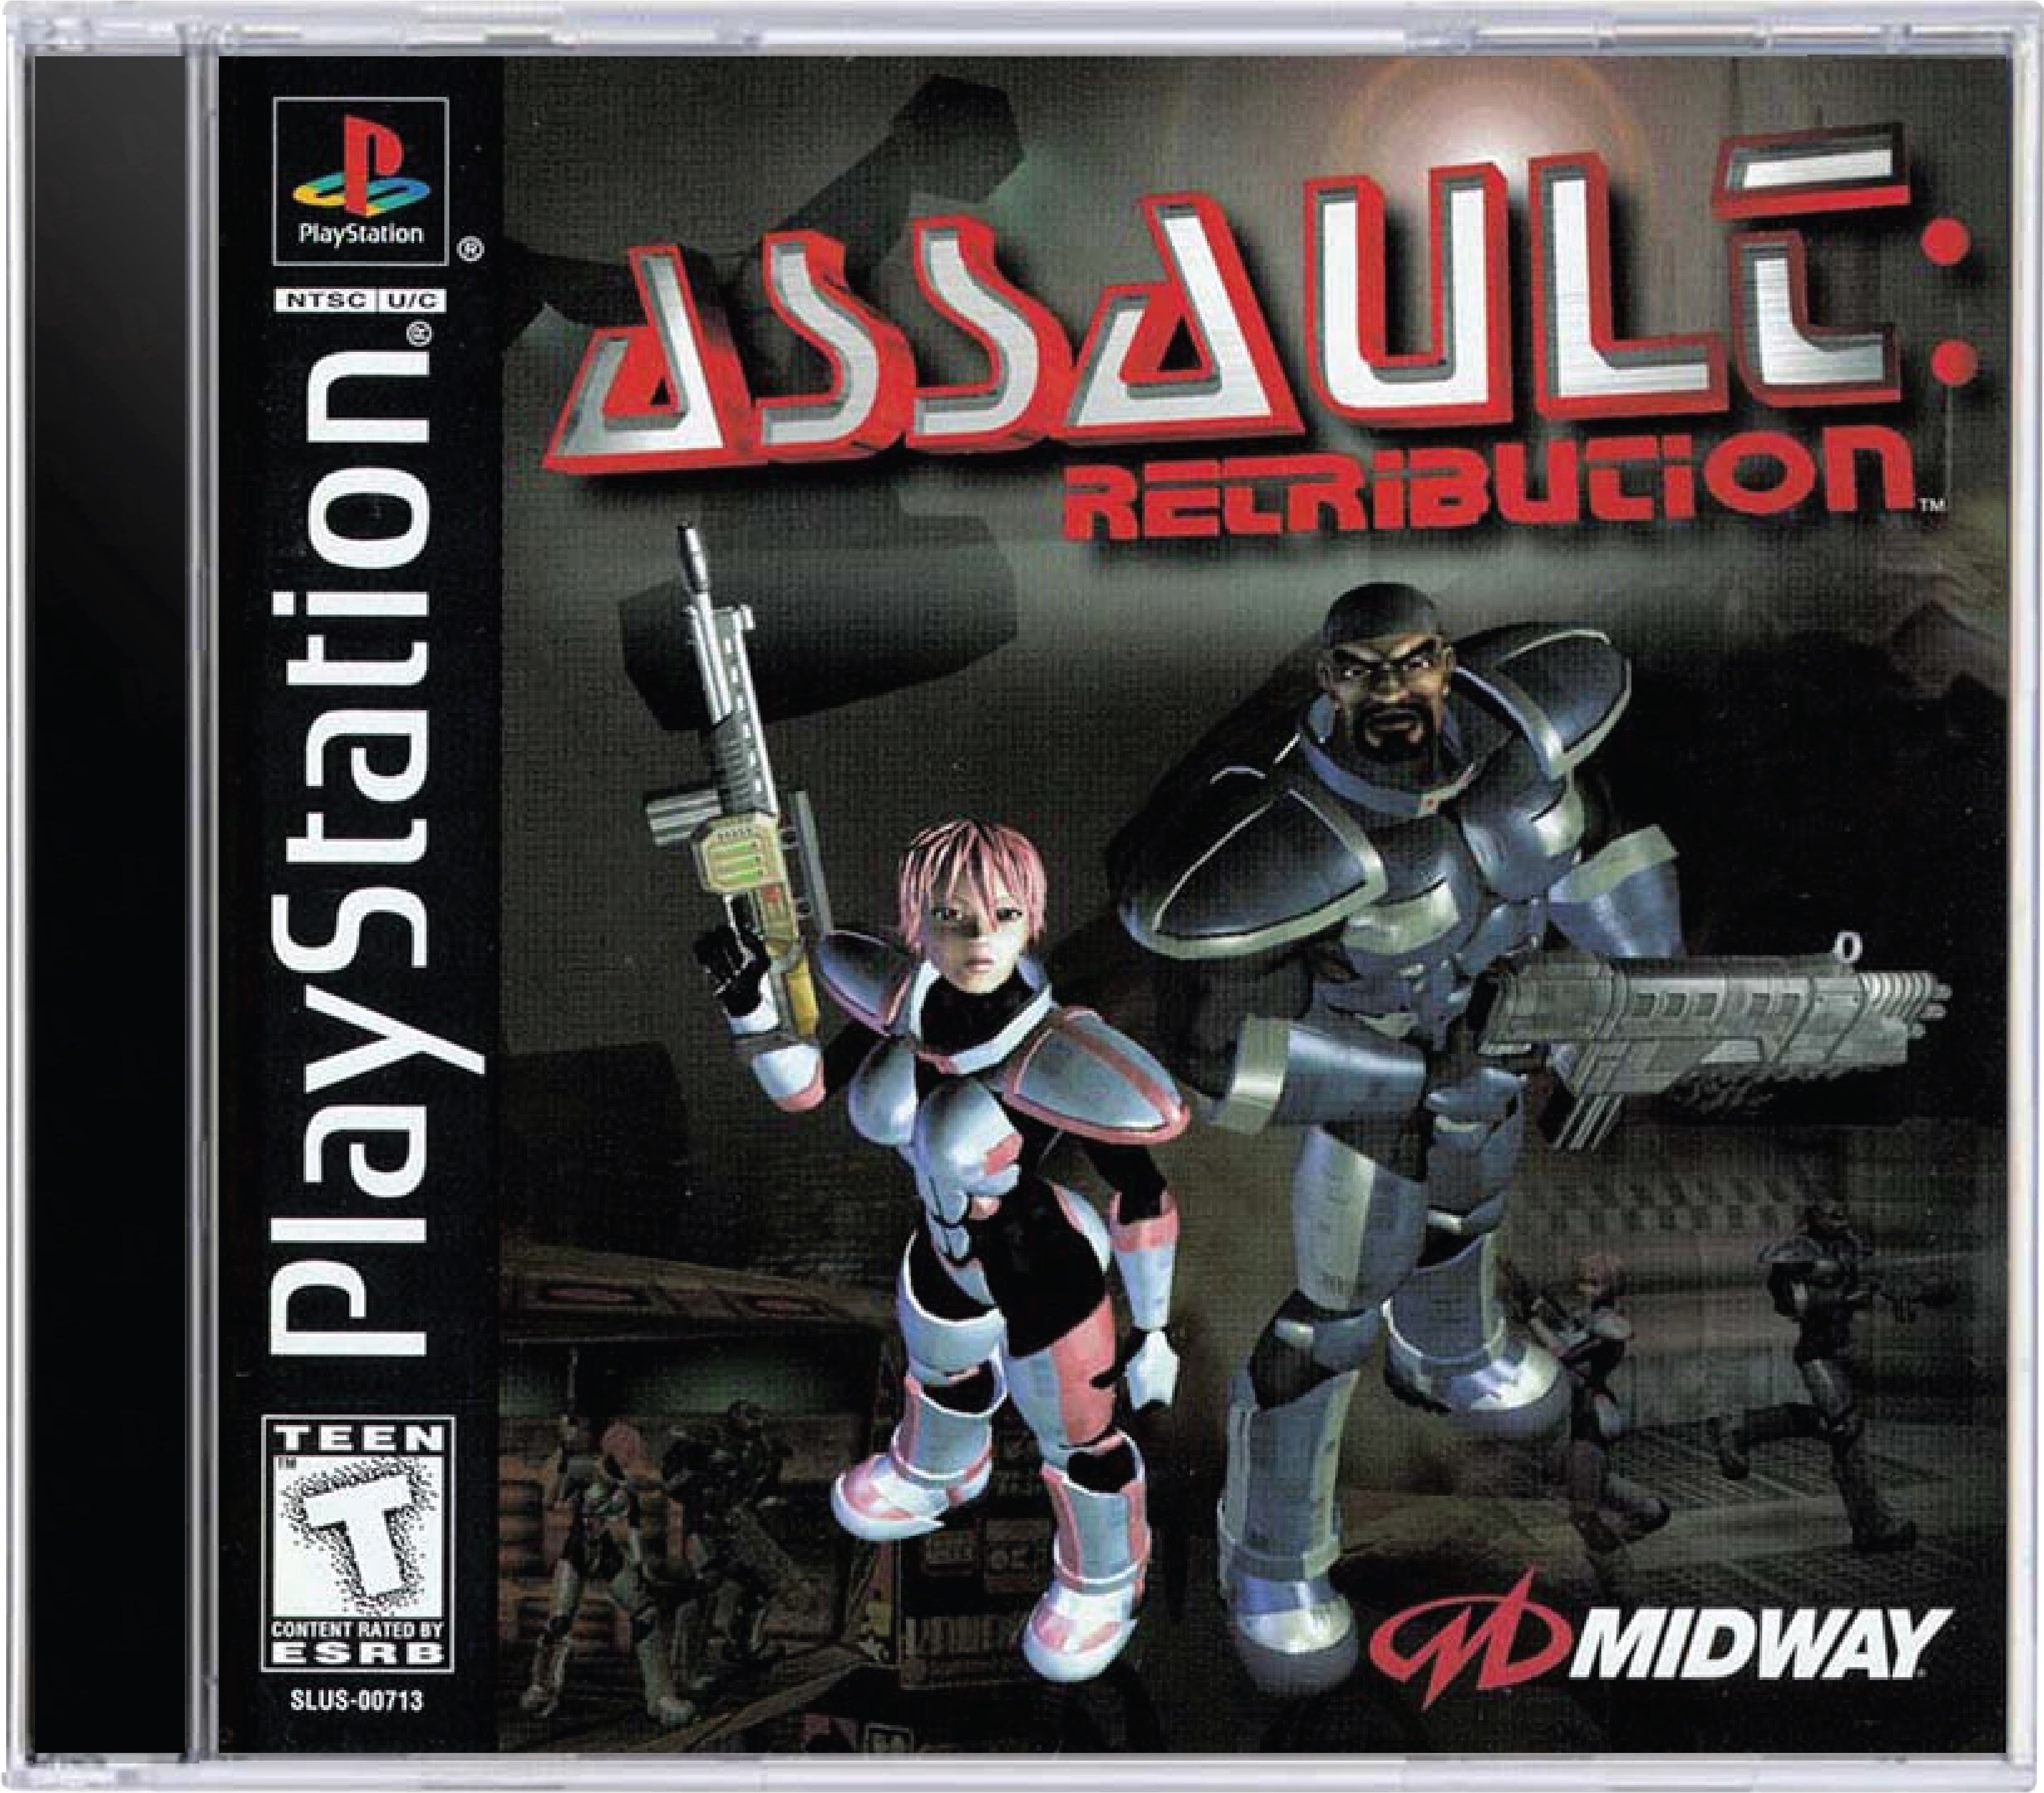 Assault Retribution Cover Art and Product Photo